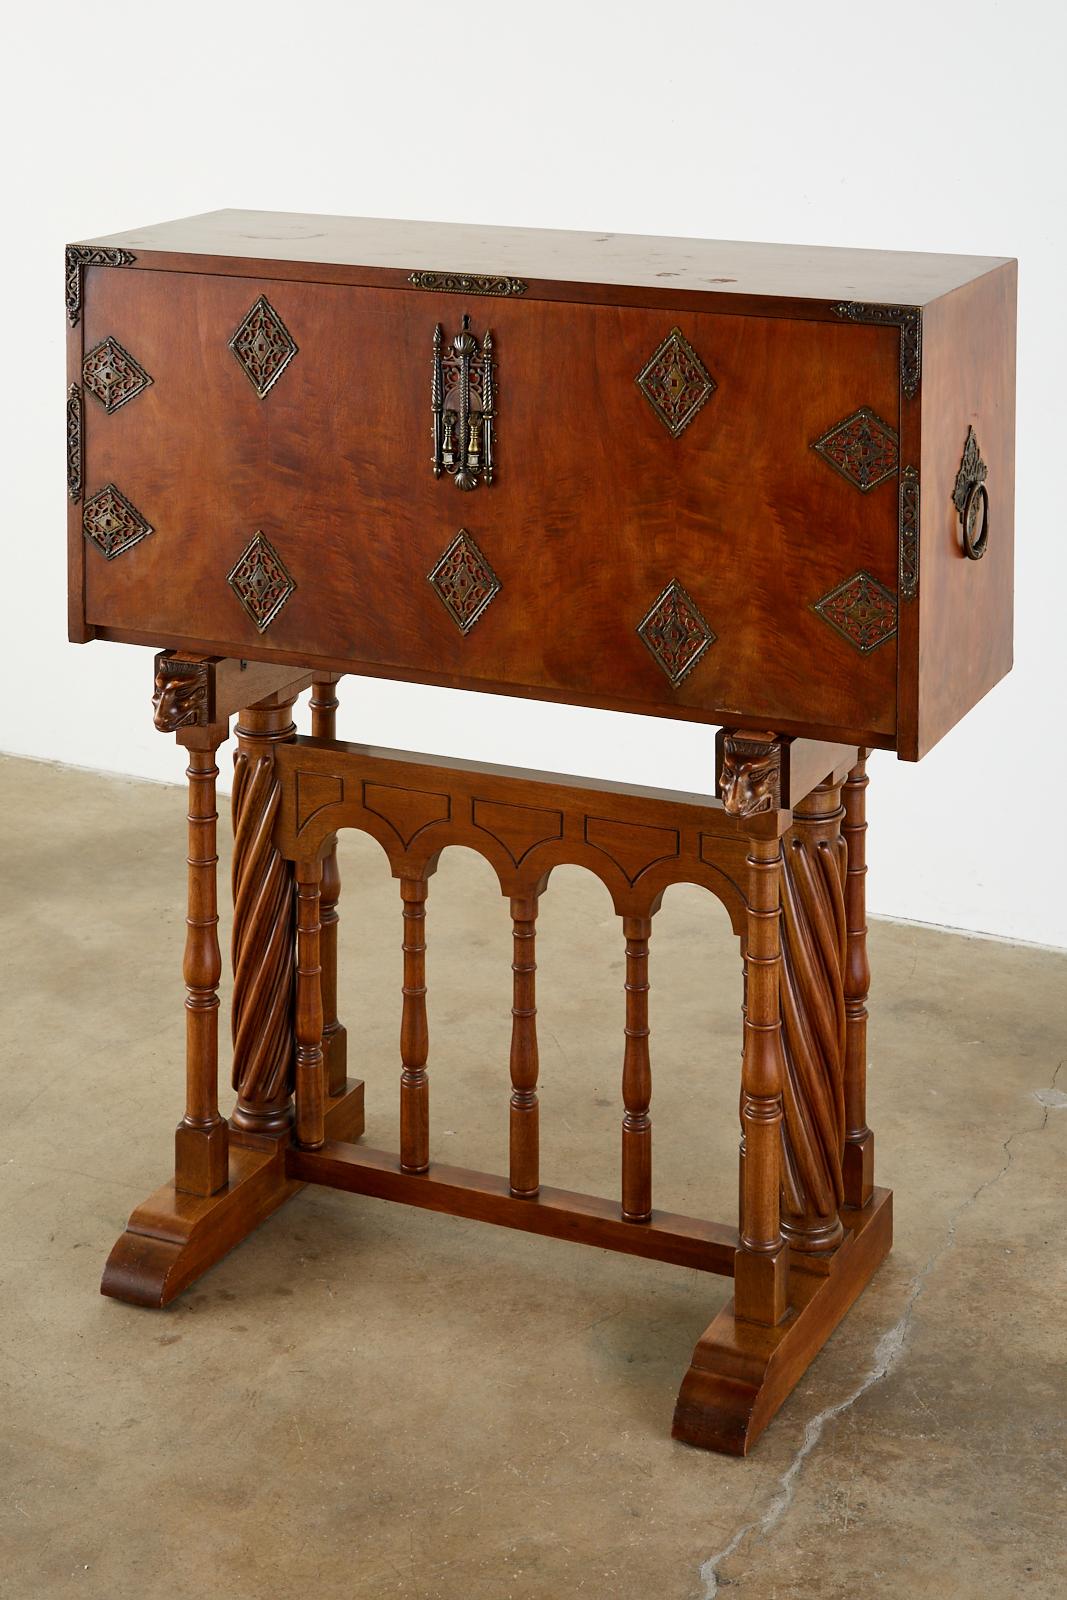 Exceptional late 19th century Spanish vargueño cabinet desk or chest on stand. Featuring a carved walnut case with brass metal strapwork, side handles, decorations, and lock plates. Also known as a bargueño or escritorio. This campaign style cabinet